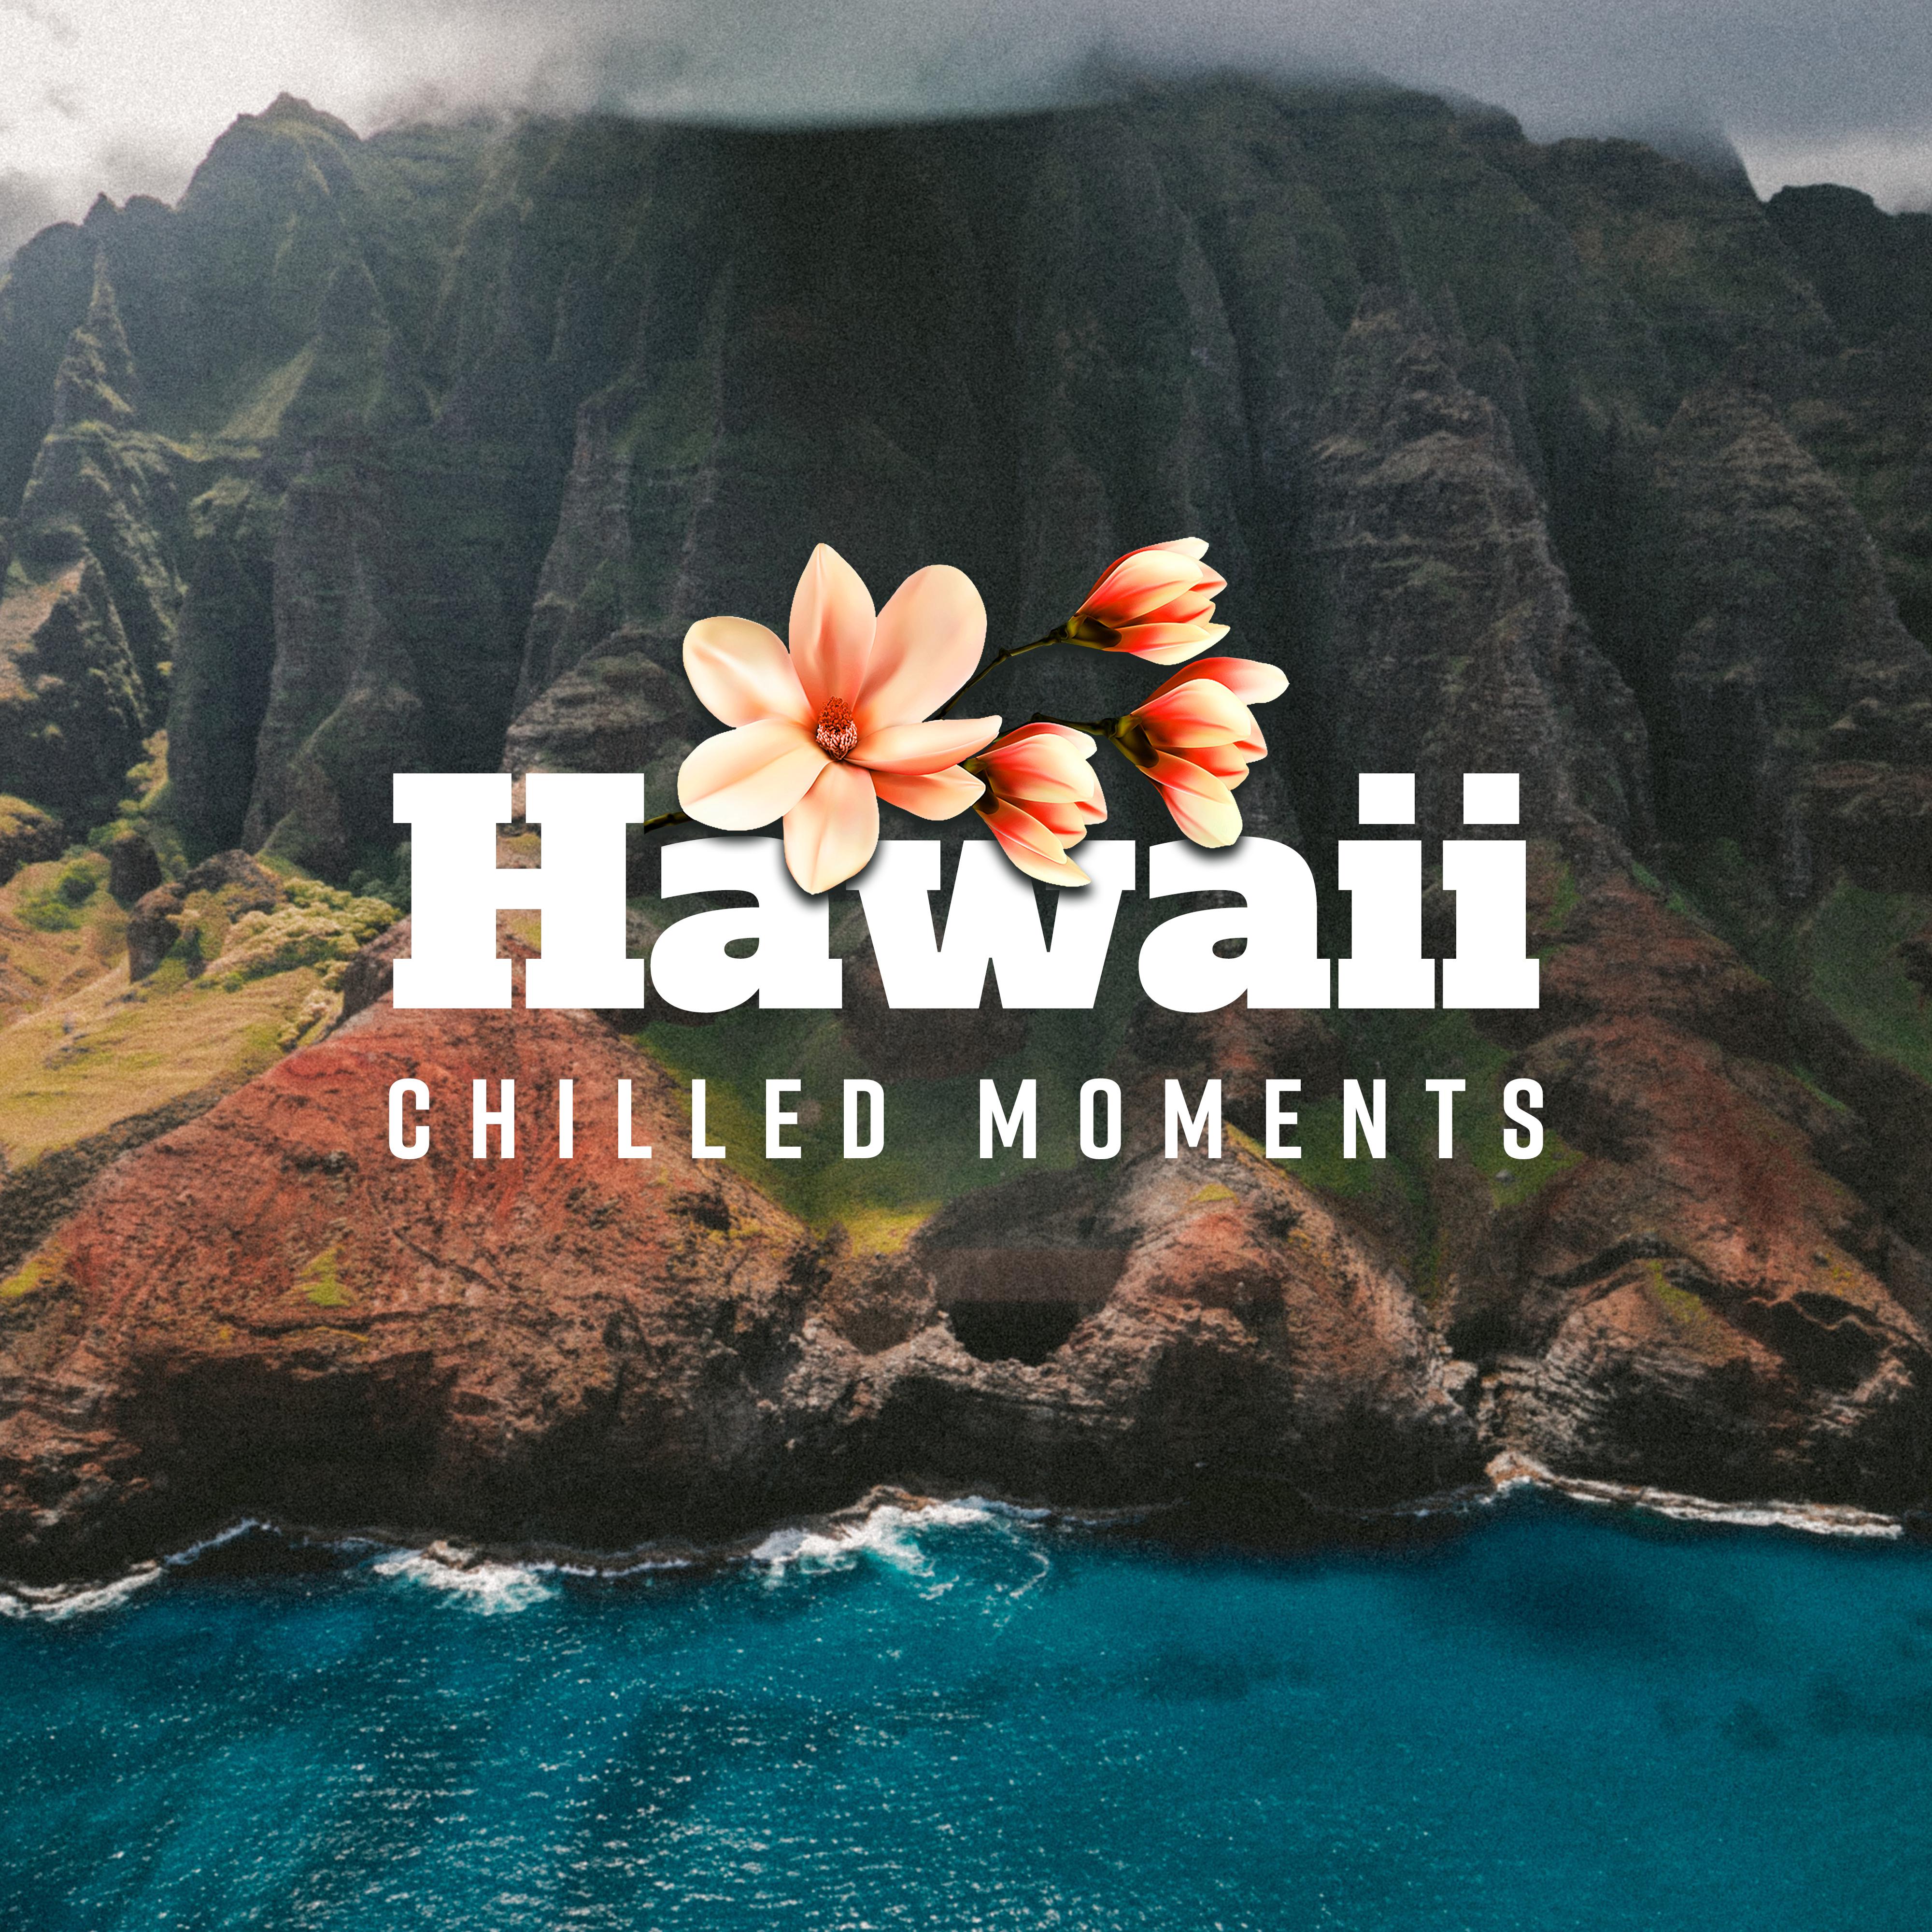 Hawaii Chilled Moments: Summer 2019 Chillout Fresh Music, Chill Out for Many Vacation Moments, Songs for Party, Dancing & Relaxation